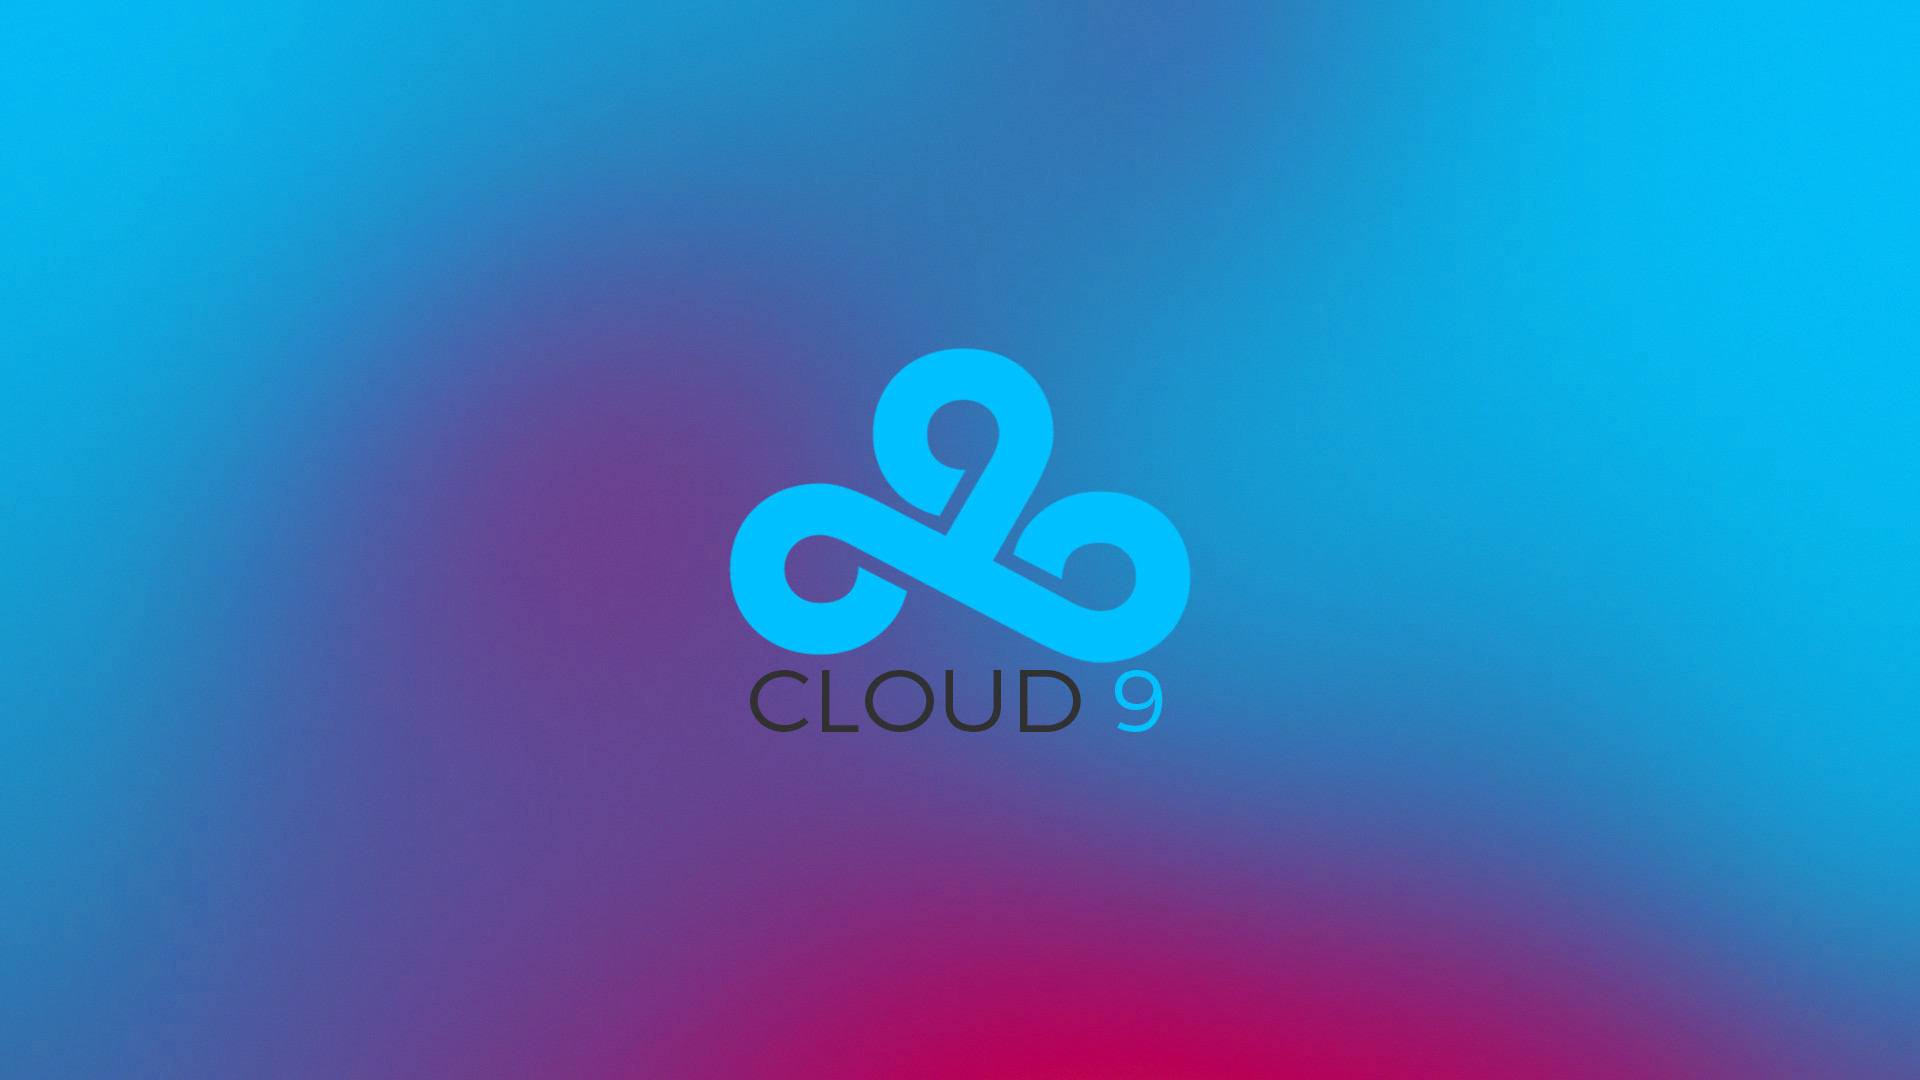 cloud 9 images reverse search